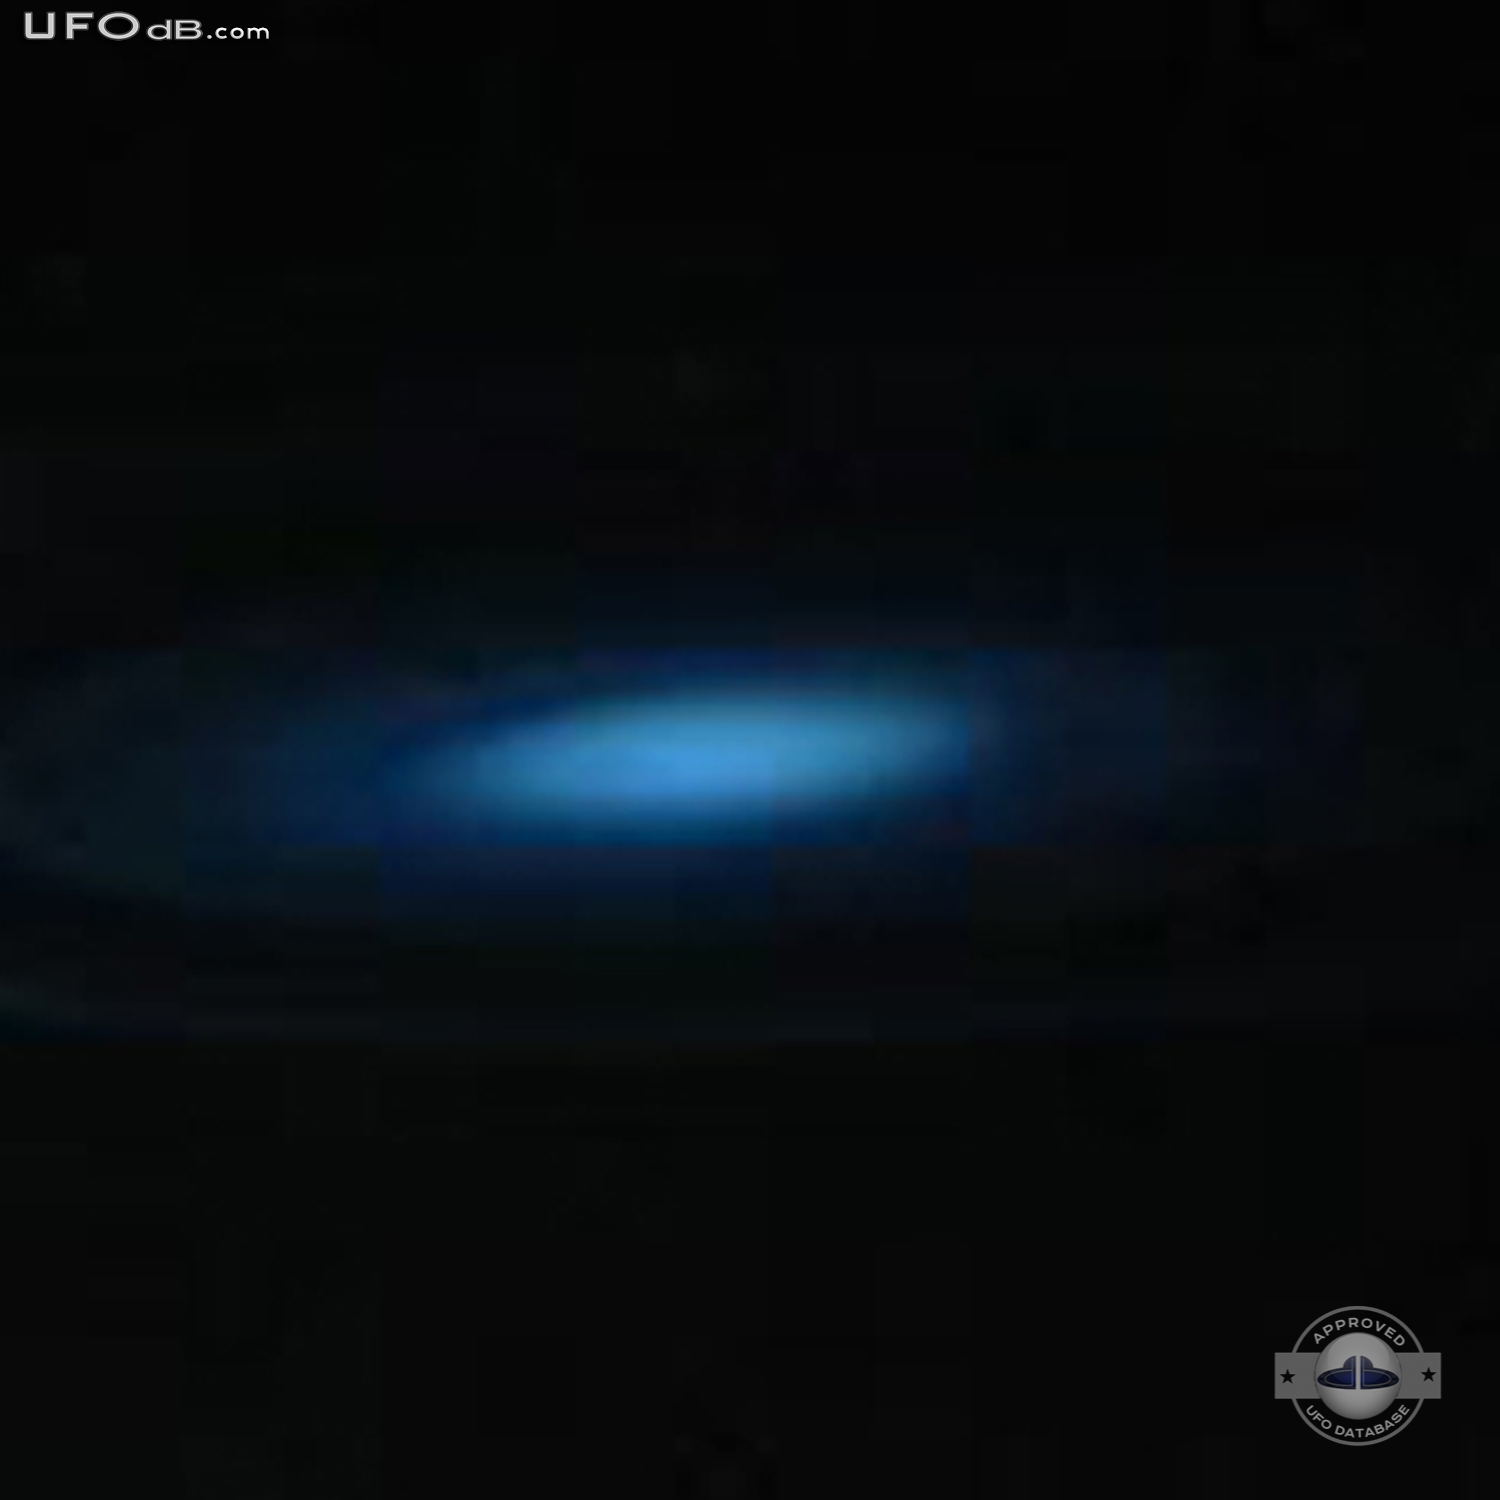 Christchurch New Zealand | Blue Glowing UFO on Picture | March 29 2011 UFO Picture #302-5